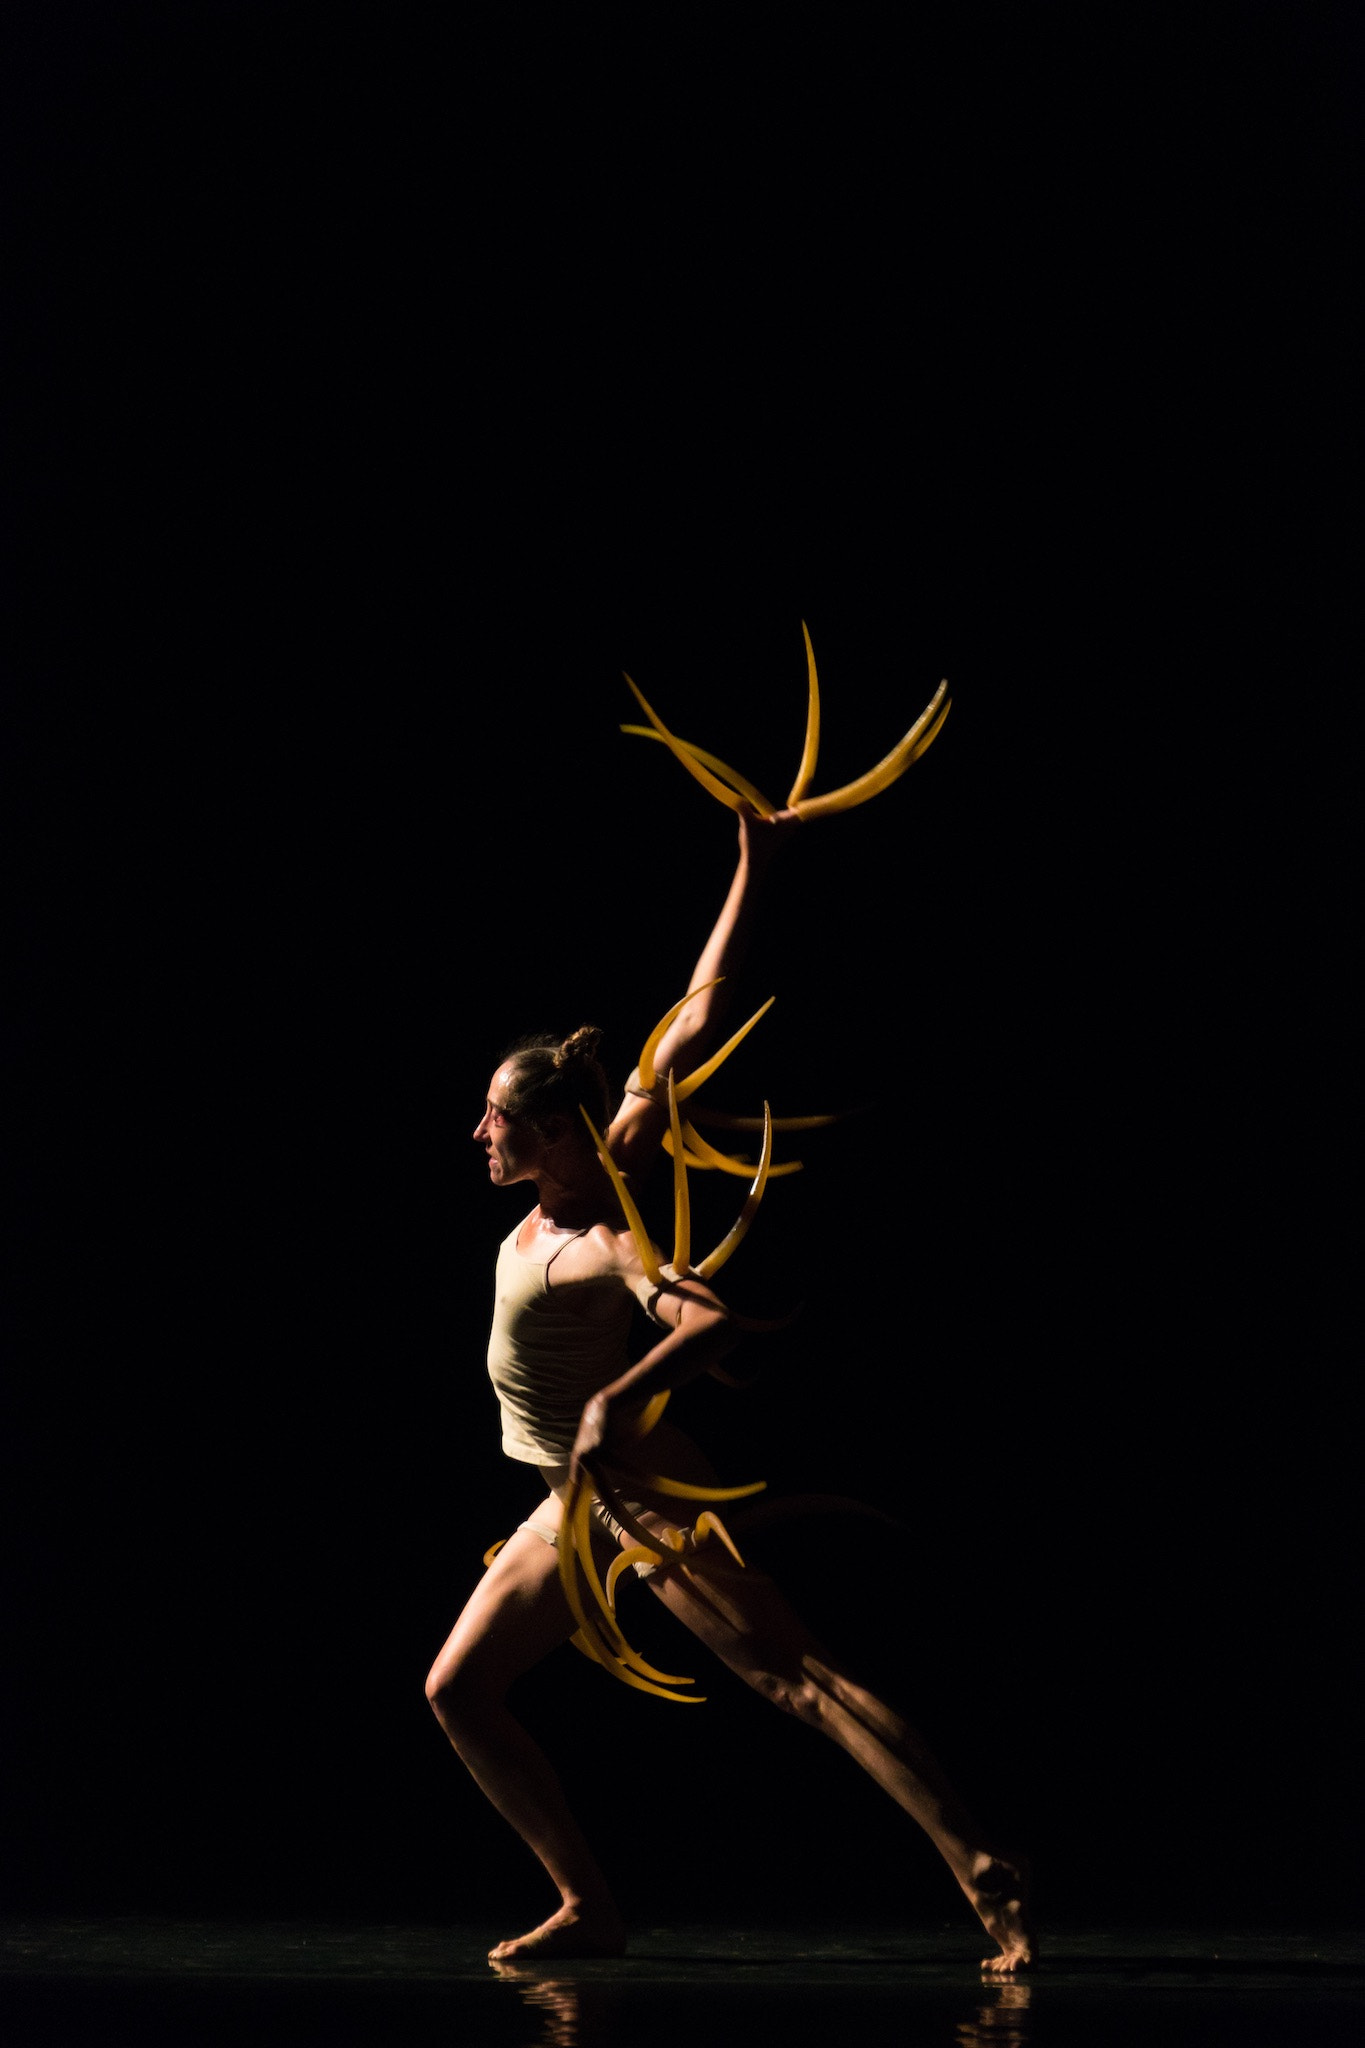 Sony a6300 + Sony E 18-200mm F3.5-6.3 OSS sample photo. Canada marie chouinard modern dance troupe rite of spring,chopin 24 preludes live in xi'an. photography